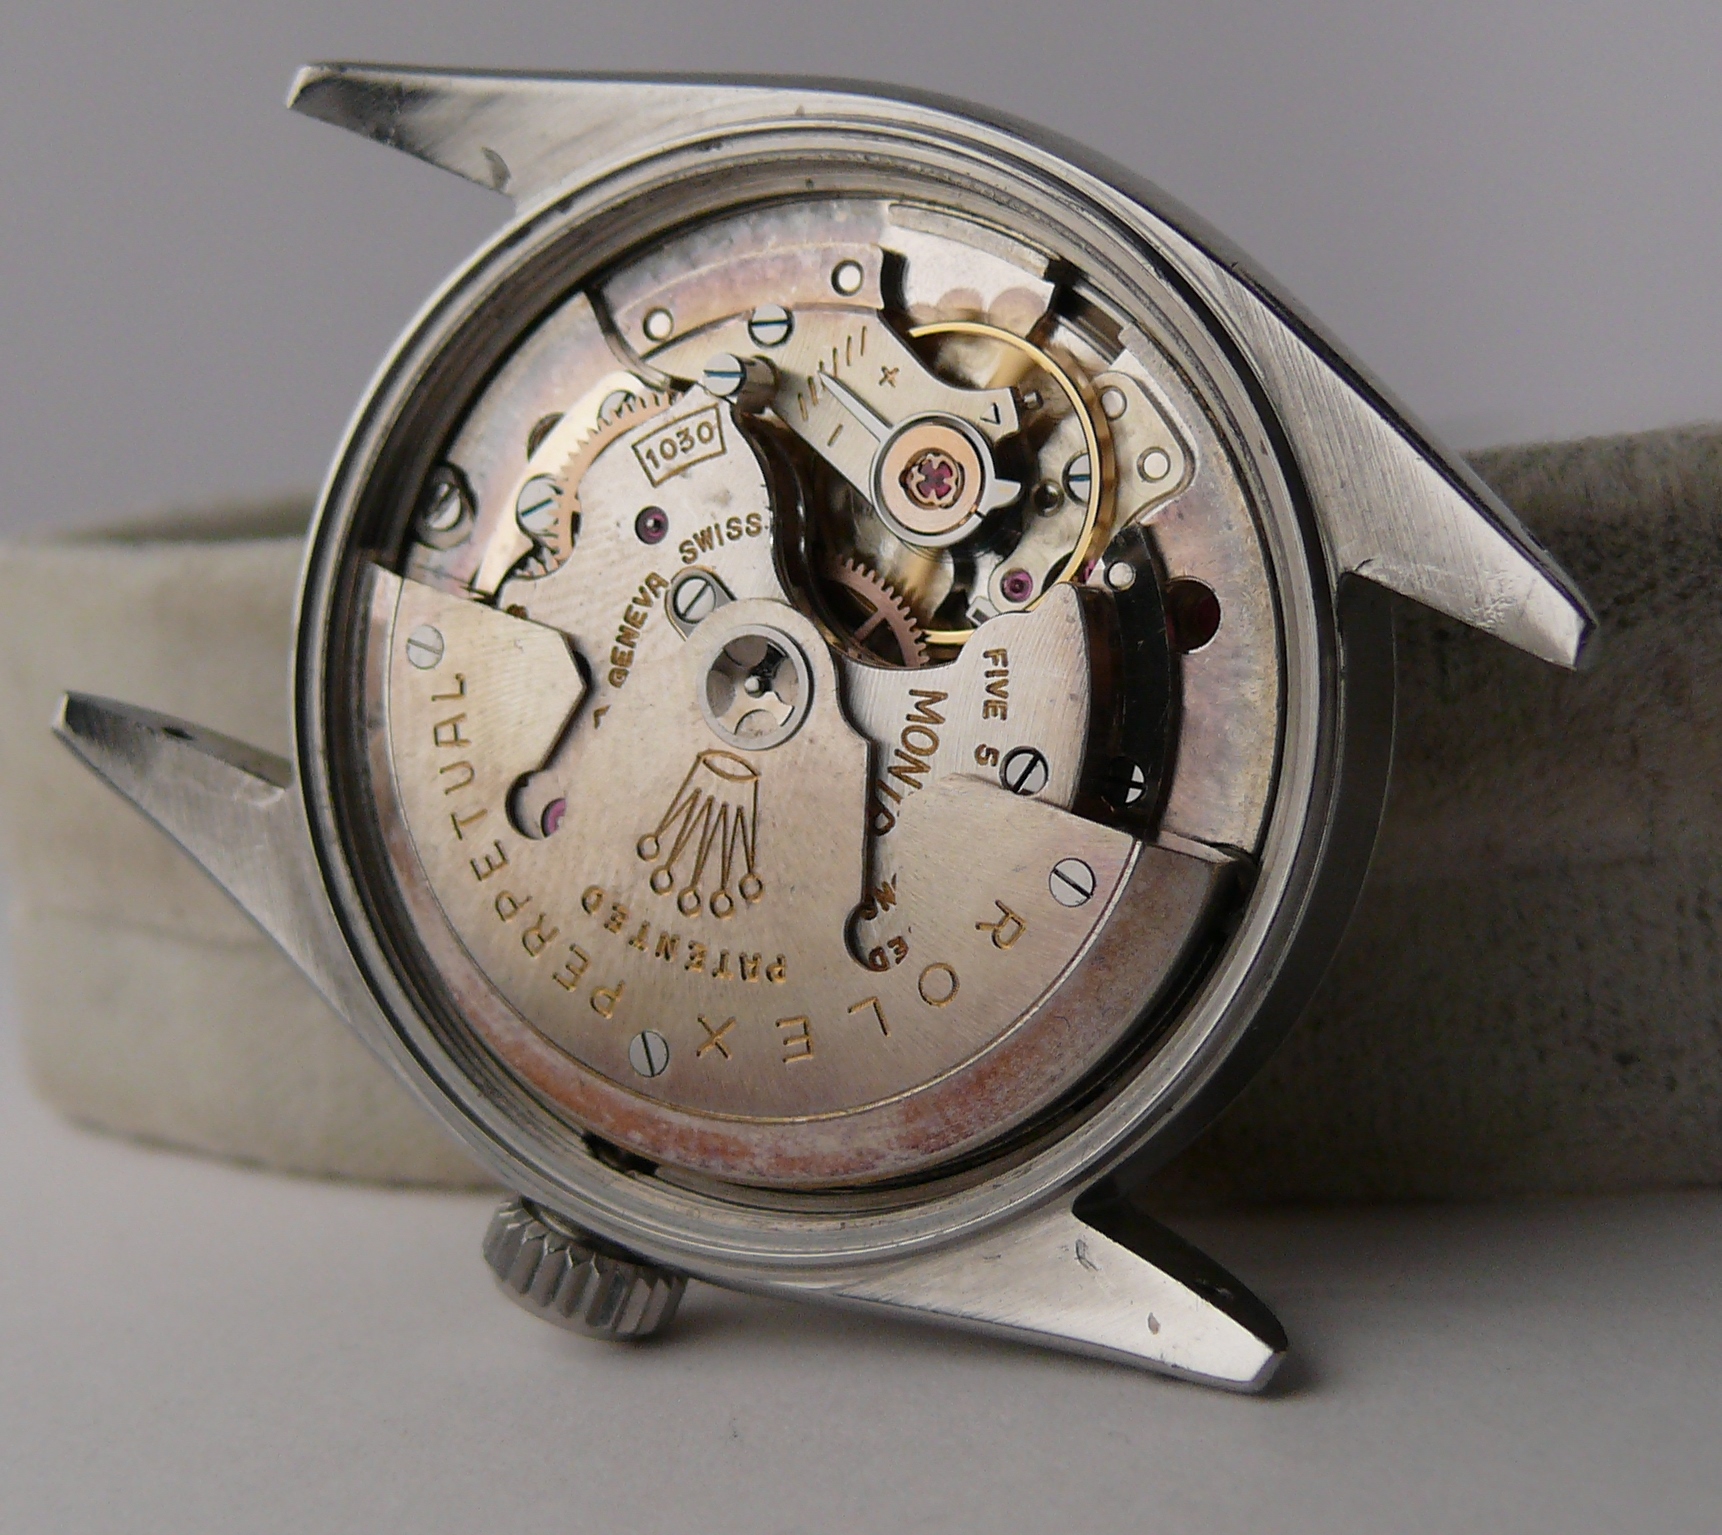 1958 Gents Rolex Oyster Perpetual Date Ref 6534, all original, serial & model numbers easily legible - Image 7 of 11